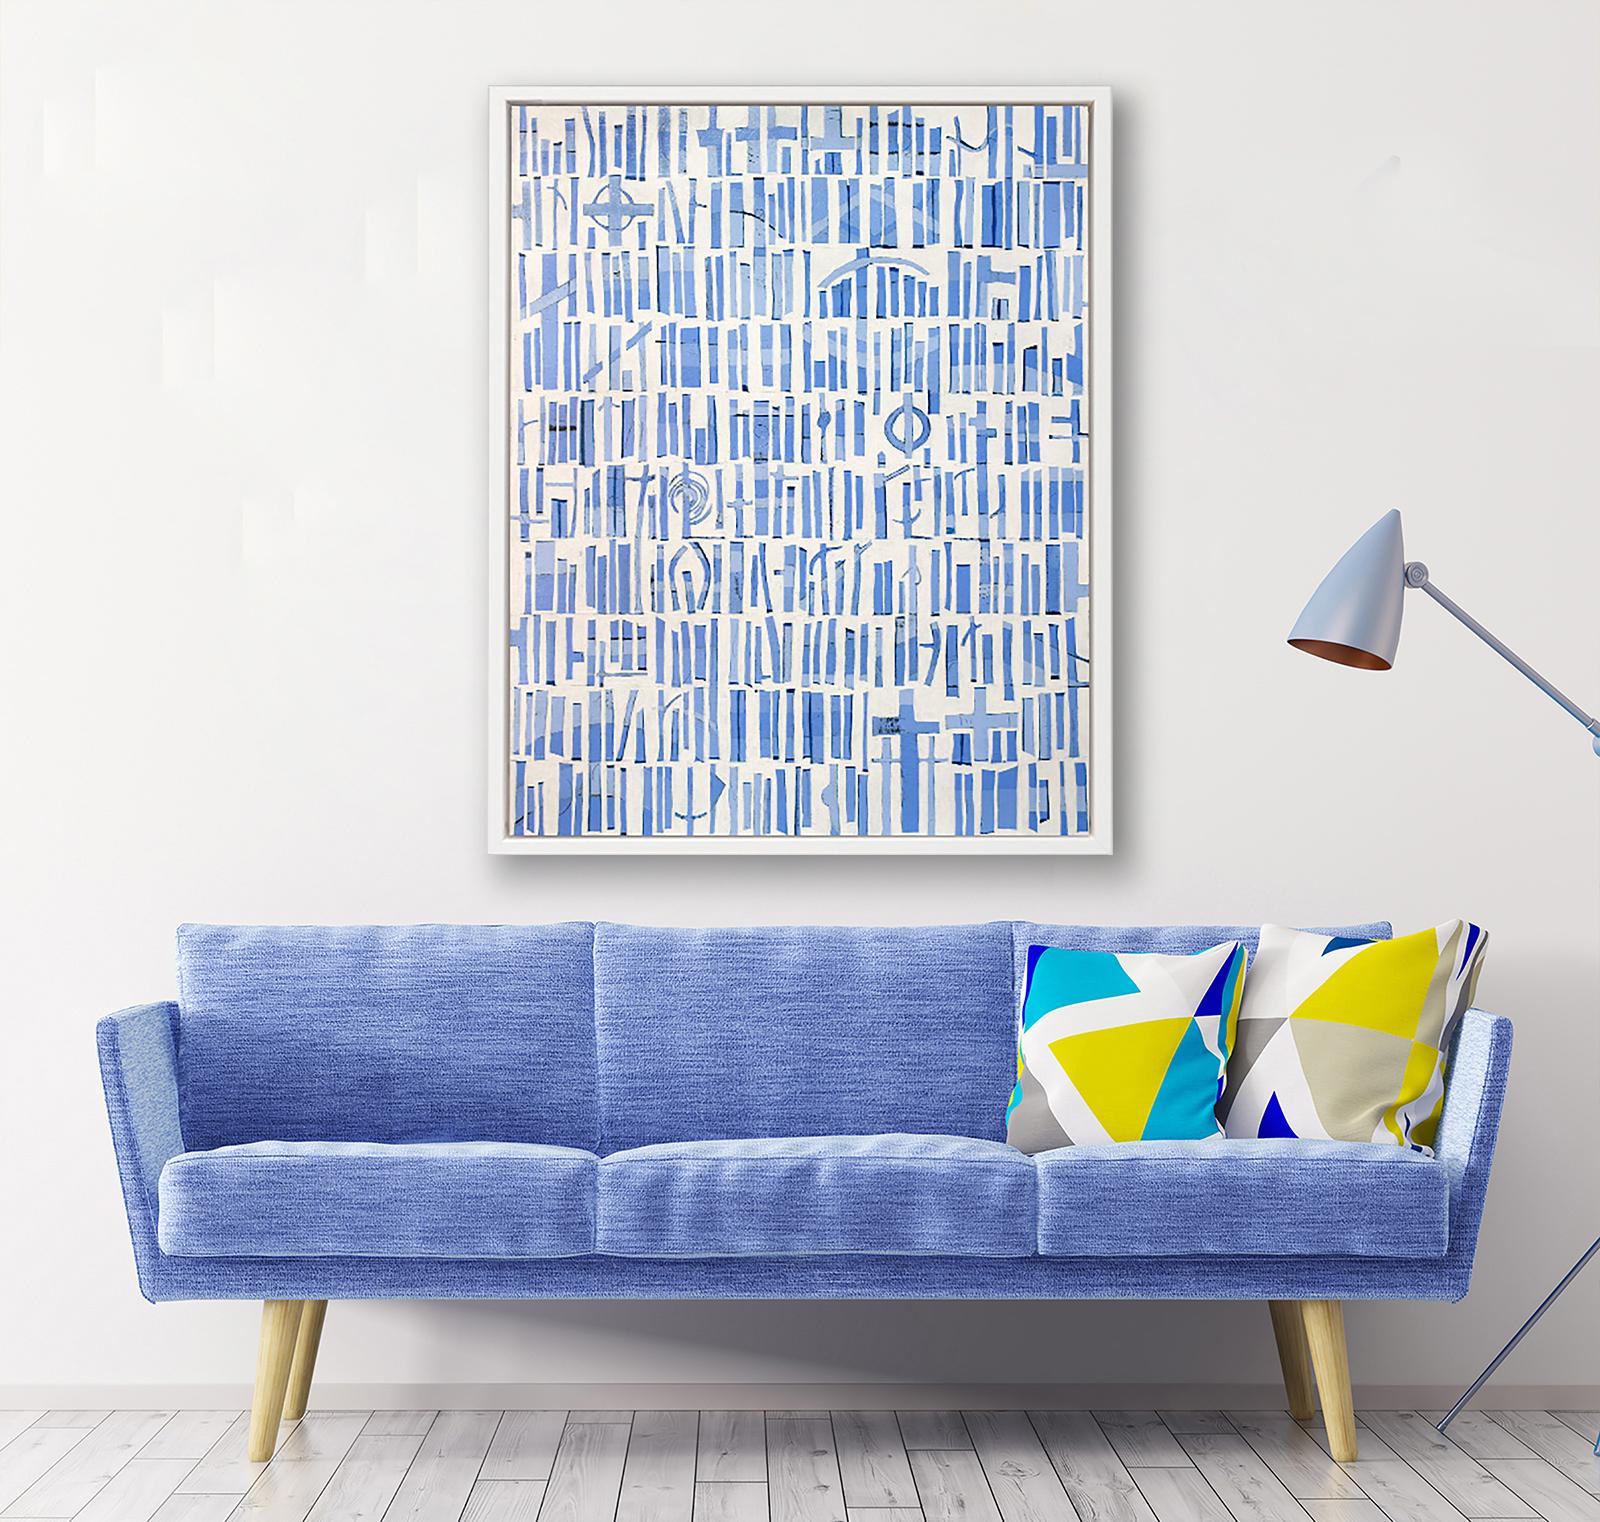 This Limited Edition abstract print, 